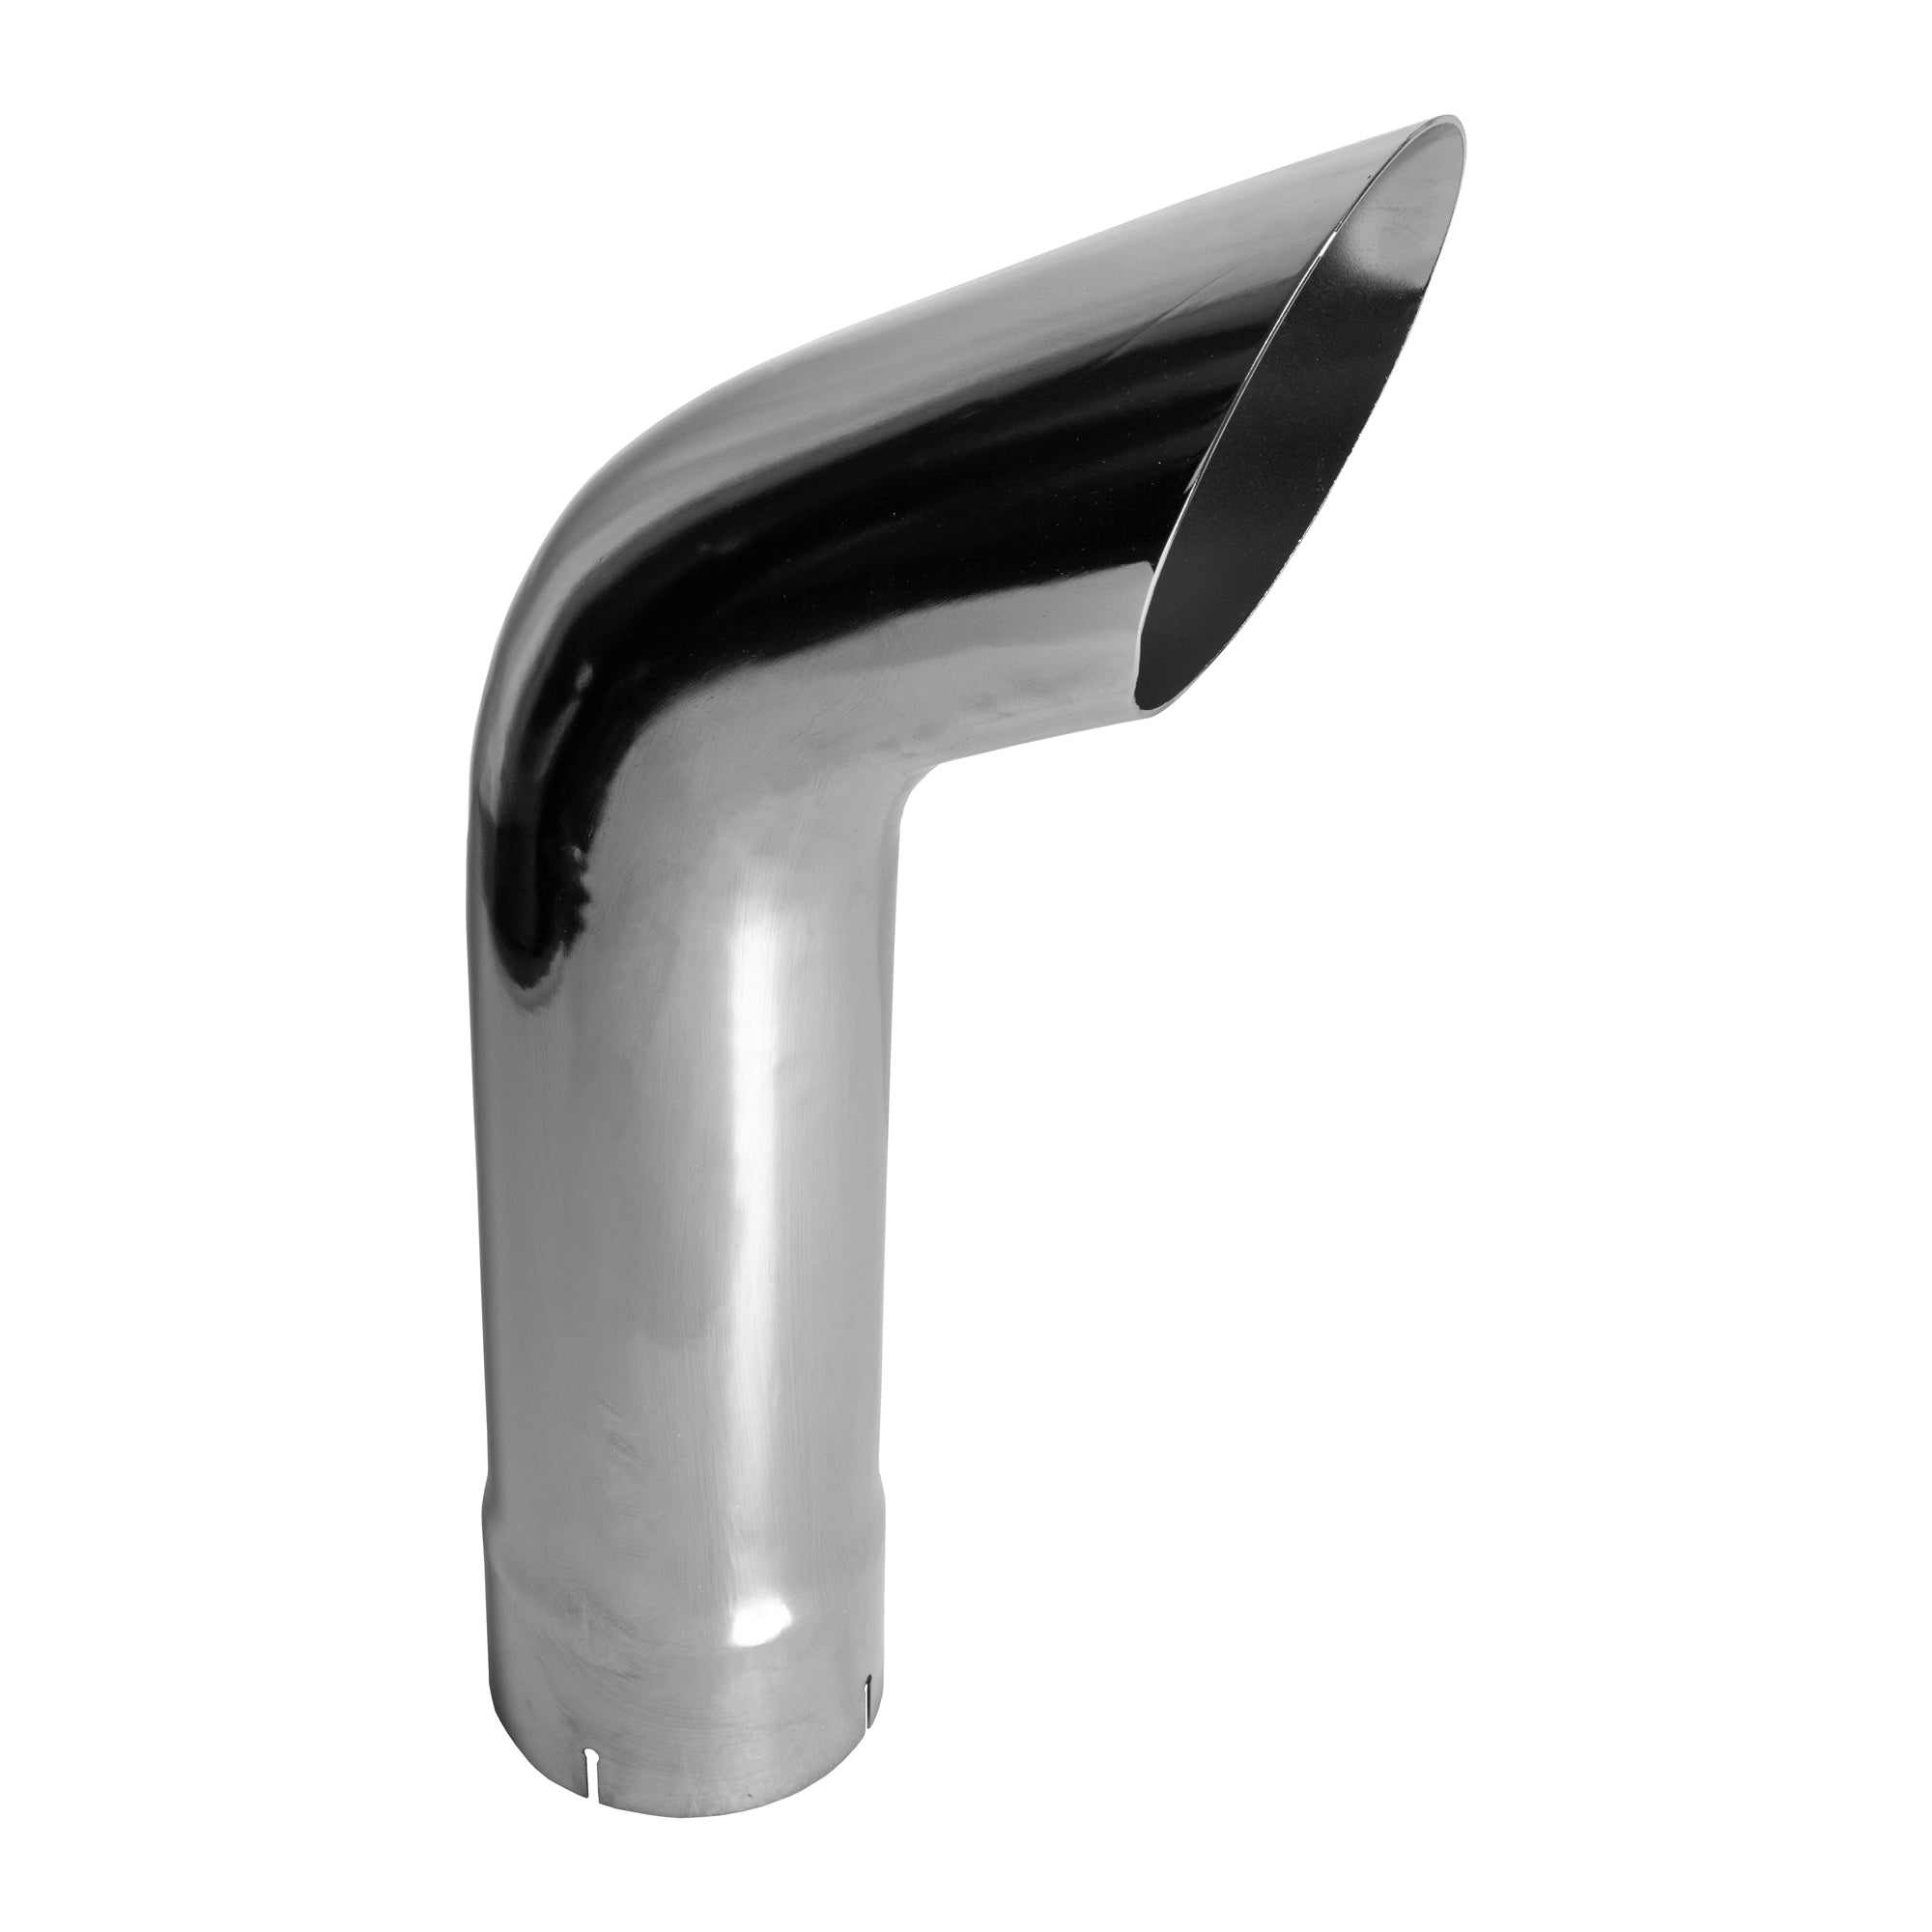 Exhaust Stack Pipe Replacement for Universal 5" x 24", Curved Chrome